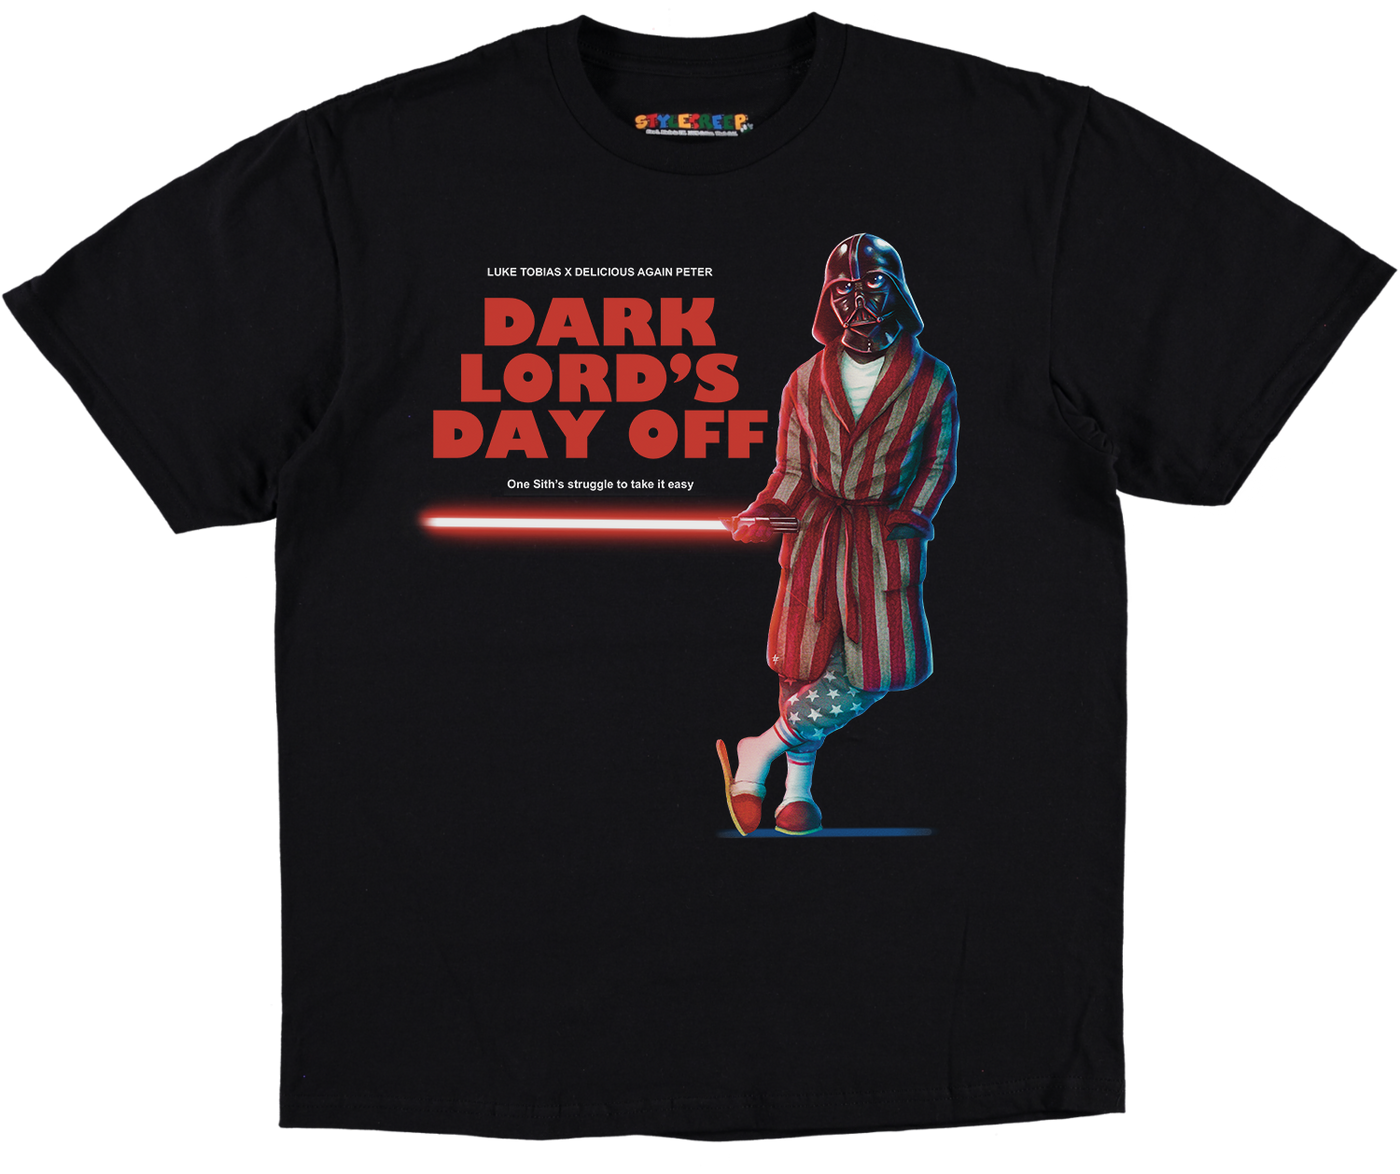 Delicious Again Peter Dark Lord's Day Off Tee (All Colours) - stylecreep.com